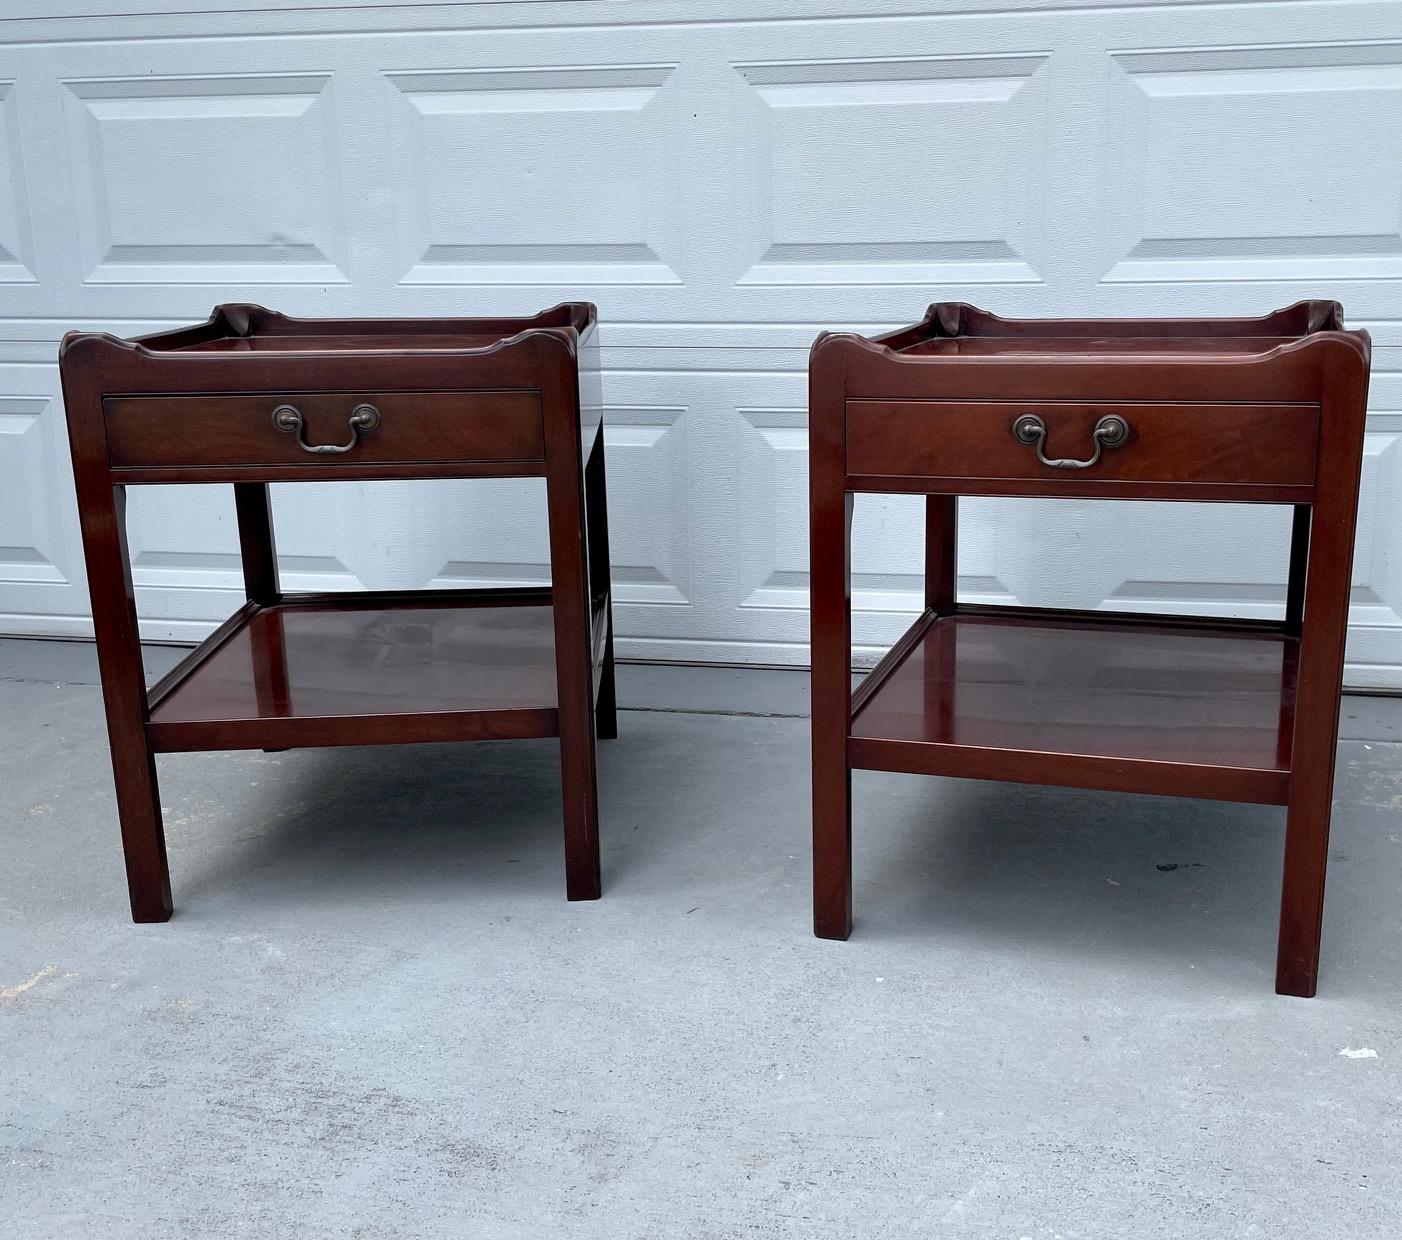 English pair of Georgian style mahogany tray top bedside tables, circa 1970

Fine quality English Pair of Georgian style mahogany tray top bedside tables, circa 1970. The tables are comprised of a 2-tiered Georgian design with a top section